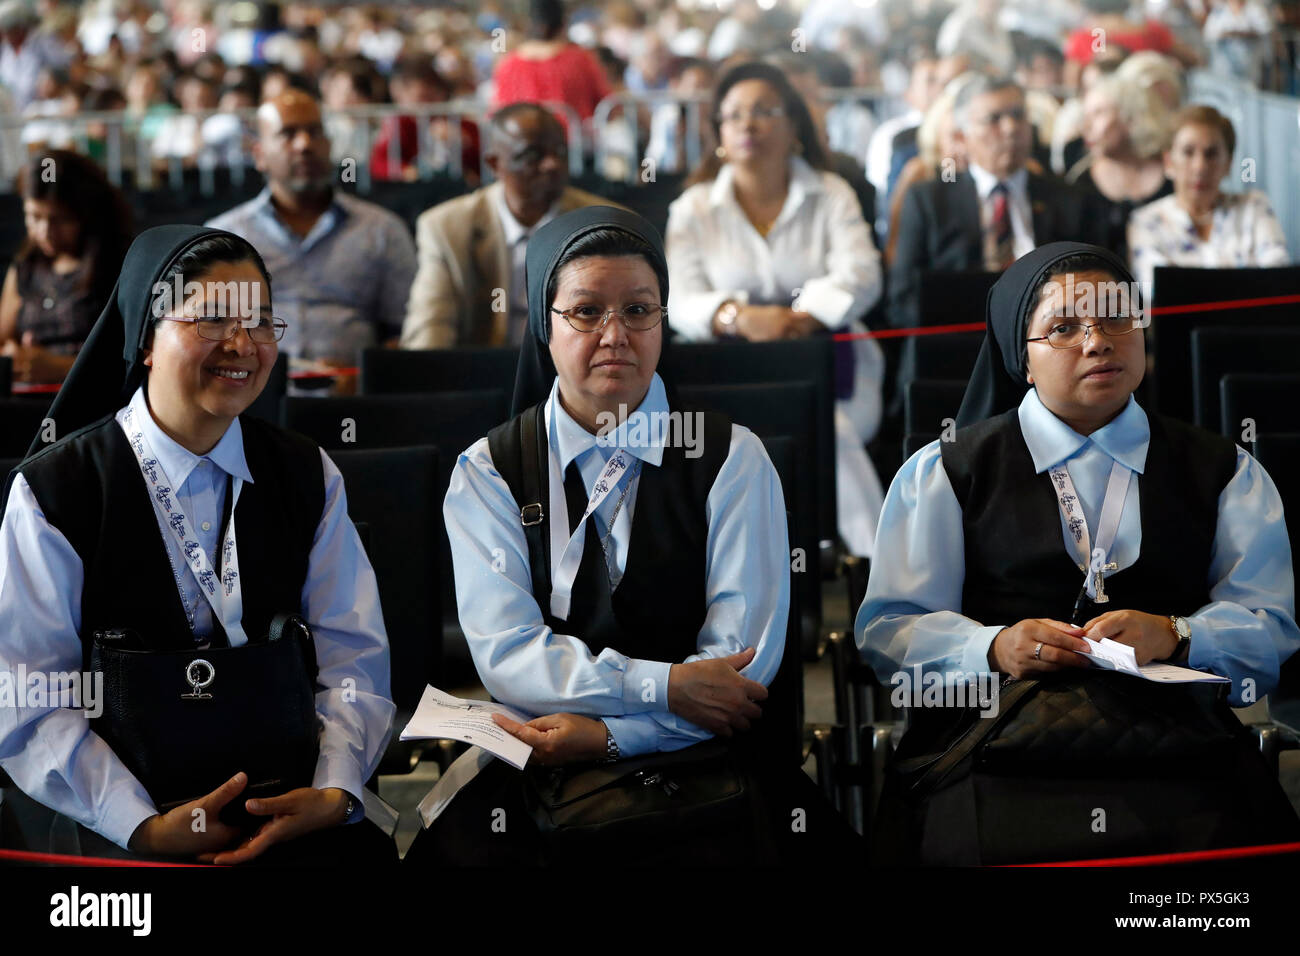 People await Pope Francis who will celebrate the Holy Mass at Palexpo hall in Geneva, on June 21, 2018 during his one-day visit at the invitation of t Stock Photo